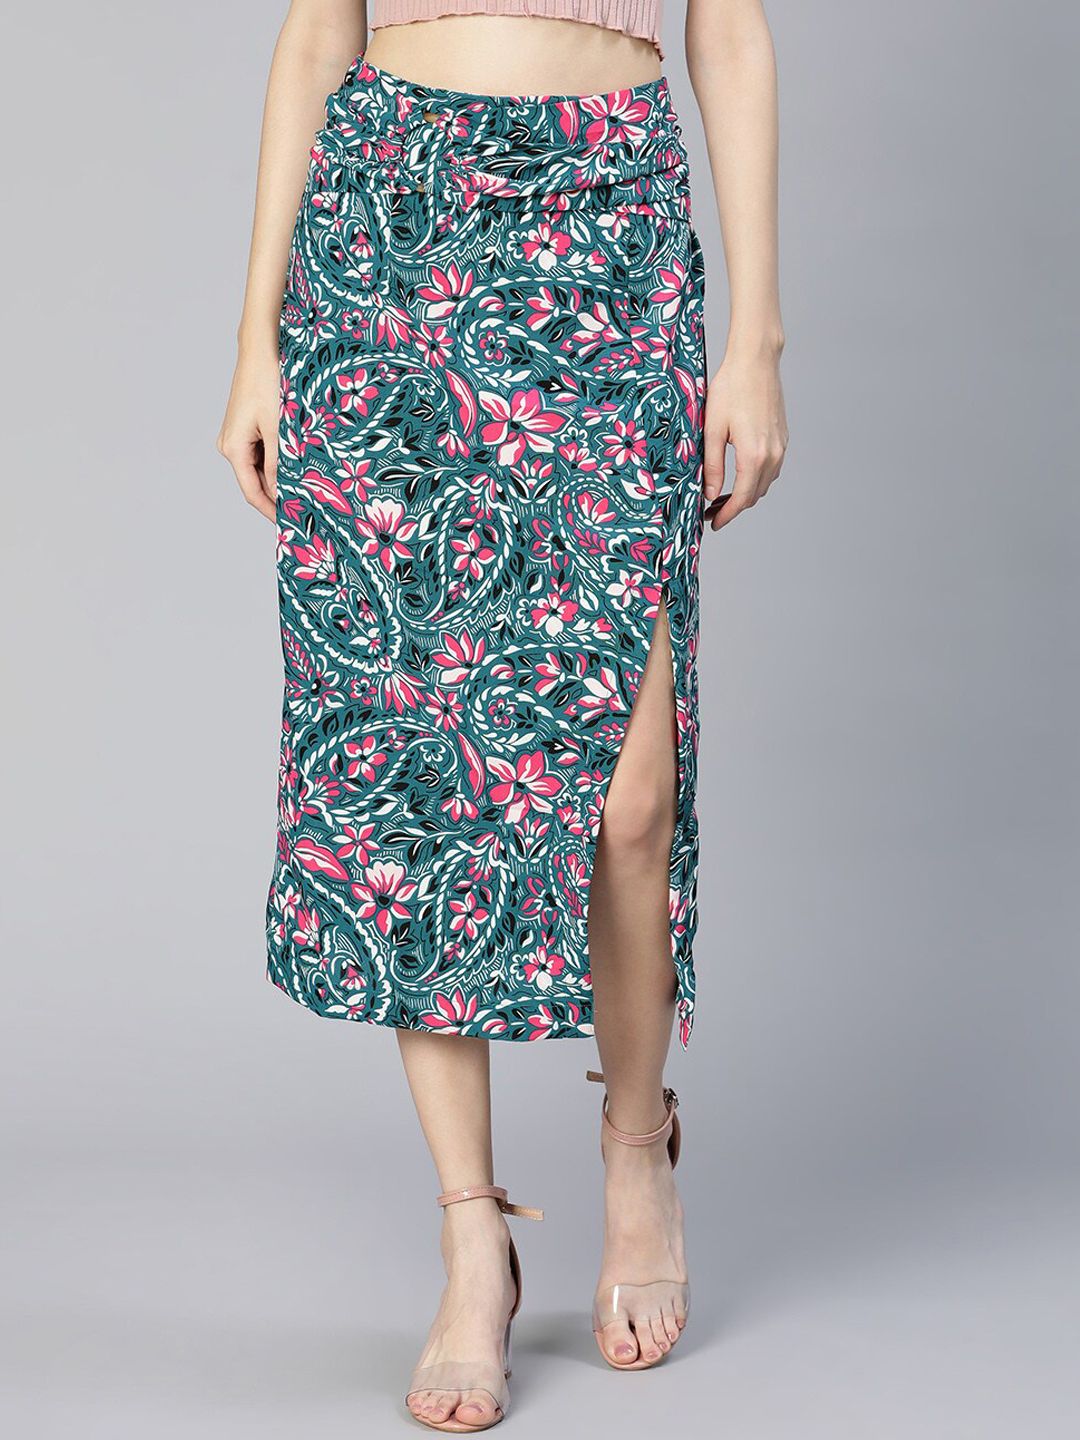 Oxolloxo Women Pink & Teal Green Printed A-Line Skirt Price in India